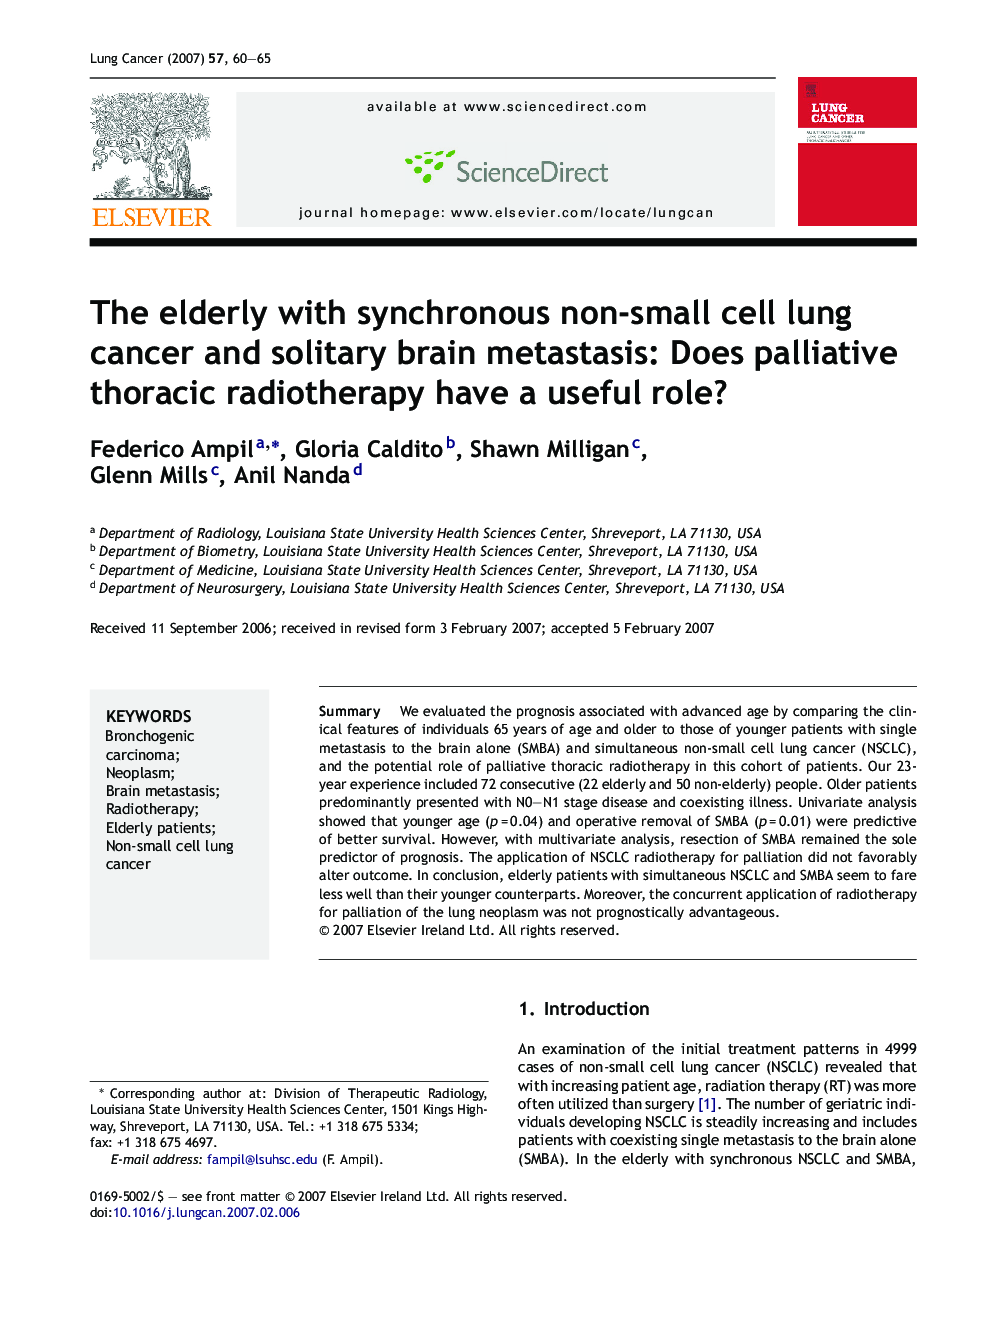 The elderly with synchronous non-small cell lung cancer and solitary brain metastasis: Does palliative thoracic radiotherapy have a useful role?